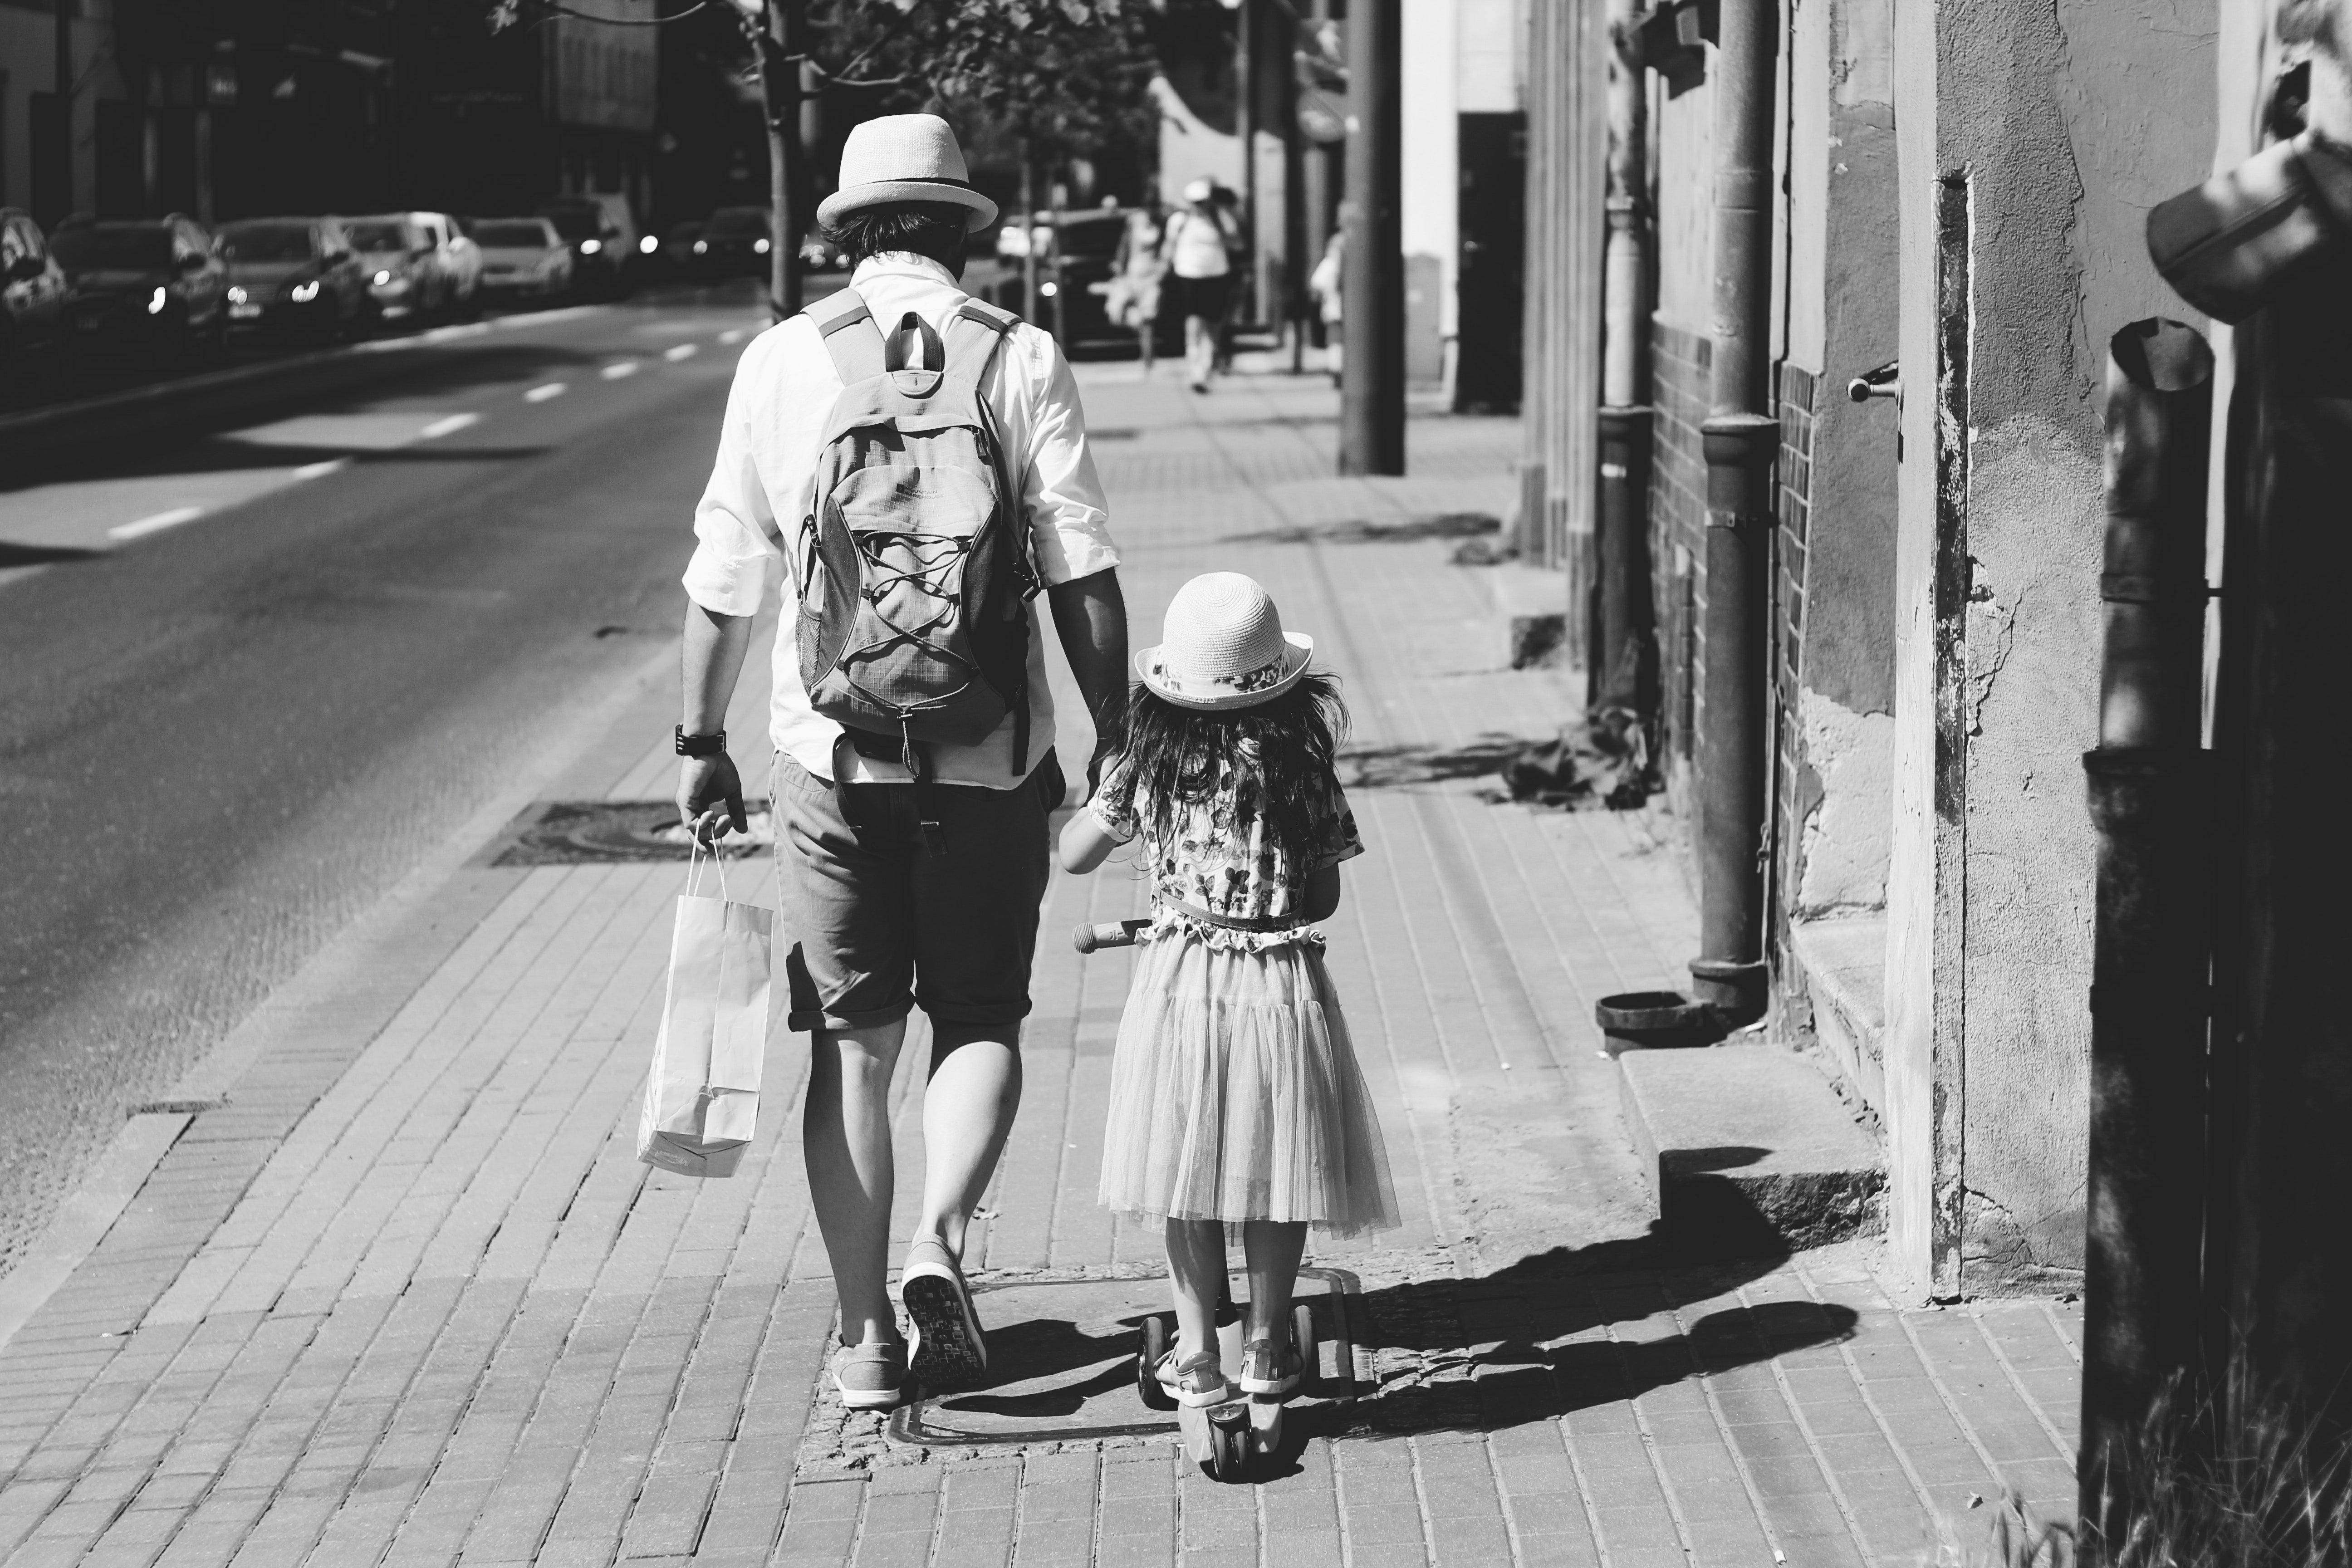 Jacob is a proud single dad to a young girl named Ashley. | Source: Pexels